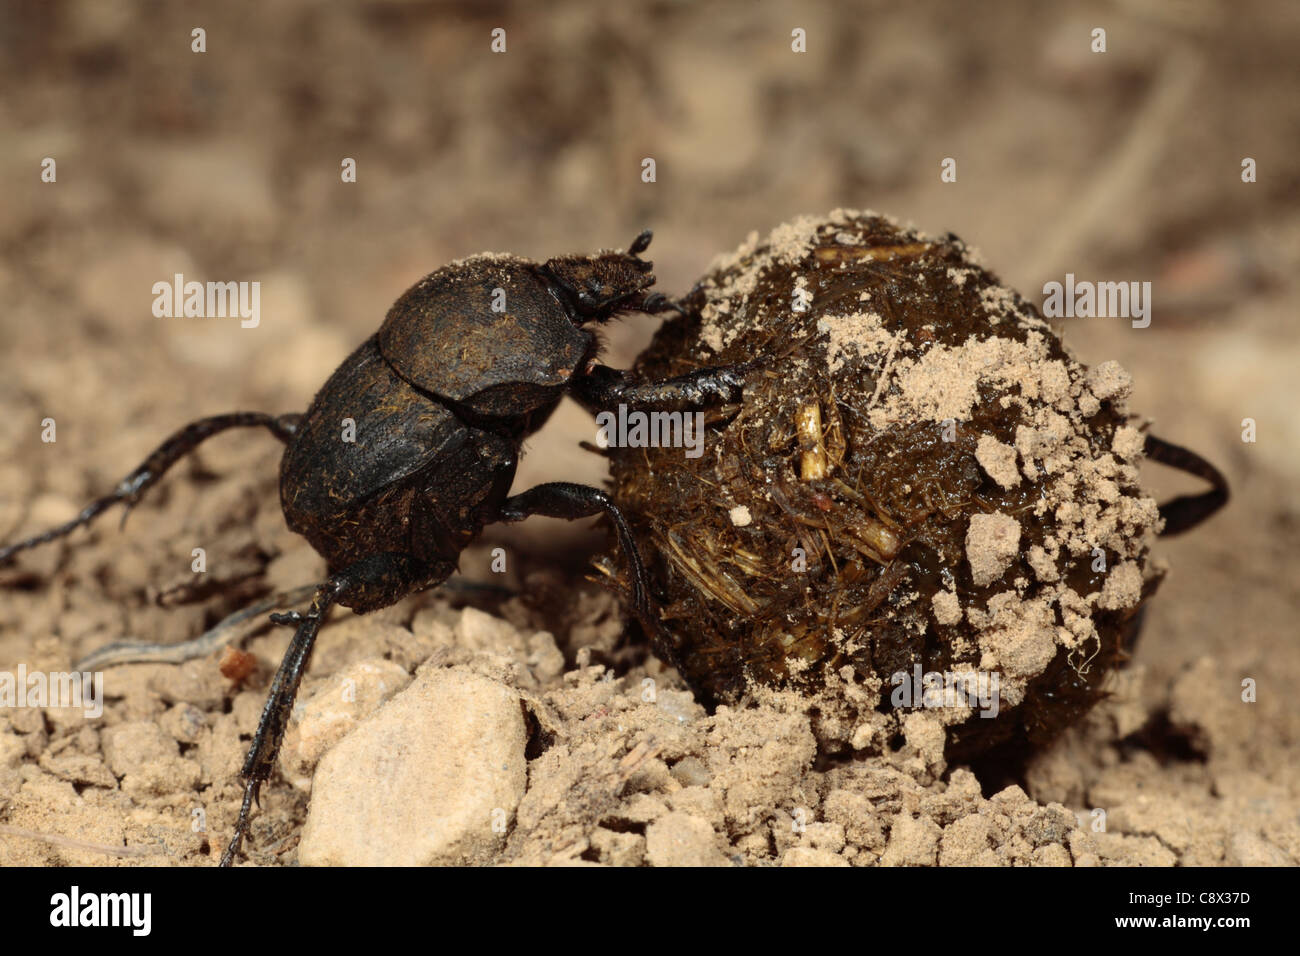 Dung Beetles (Sisyphus scheafferi) rolling a ball of cow dung. This species work in pairs, the beetle on the right pushing. Stock Photo